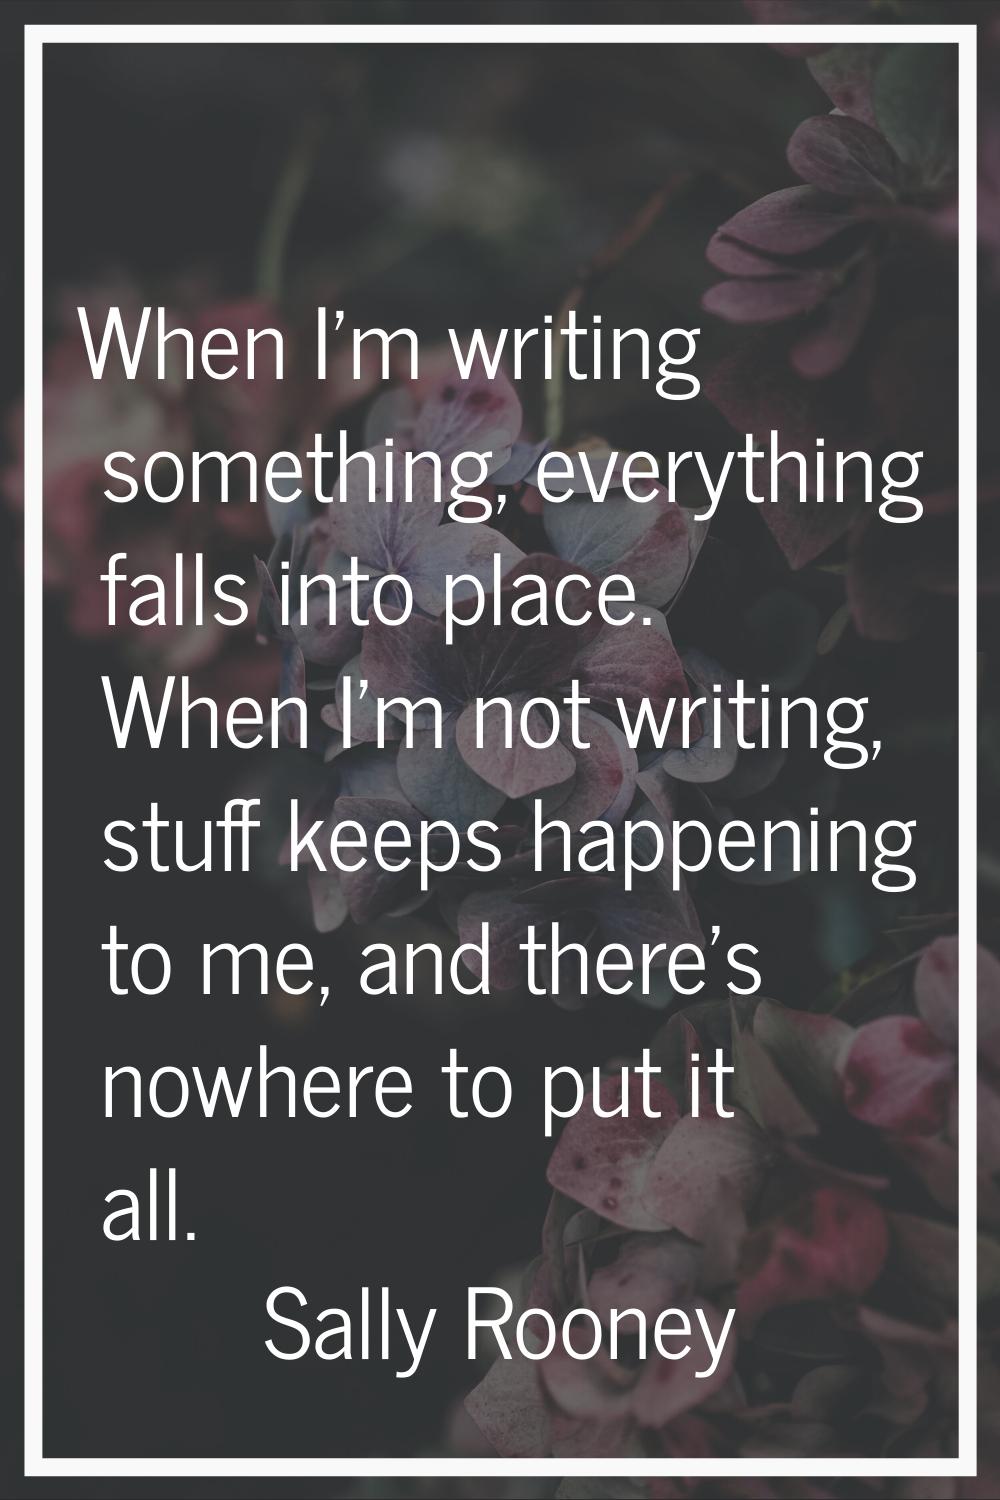 When I'm writing something, everything falls into place. When I'm not writing, stuff keeps happenin